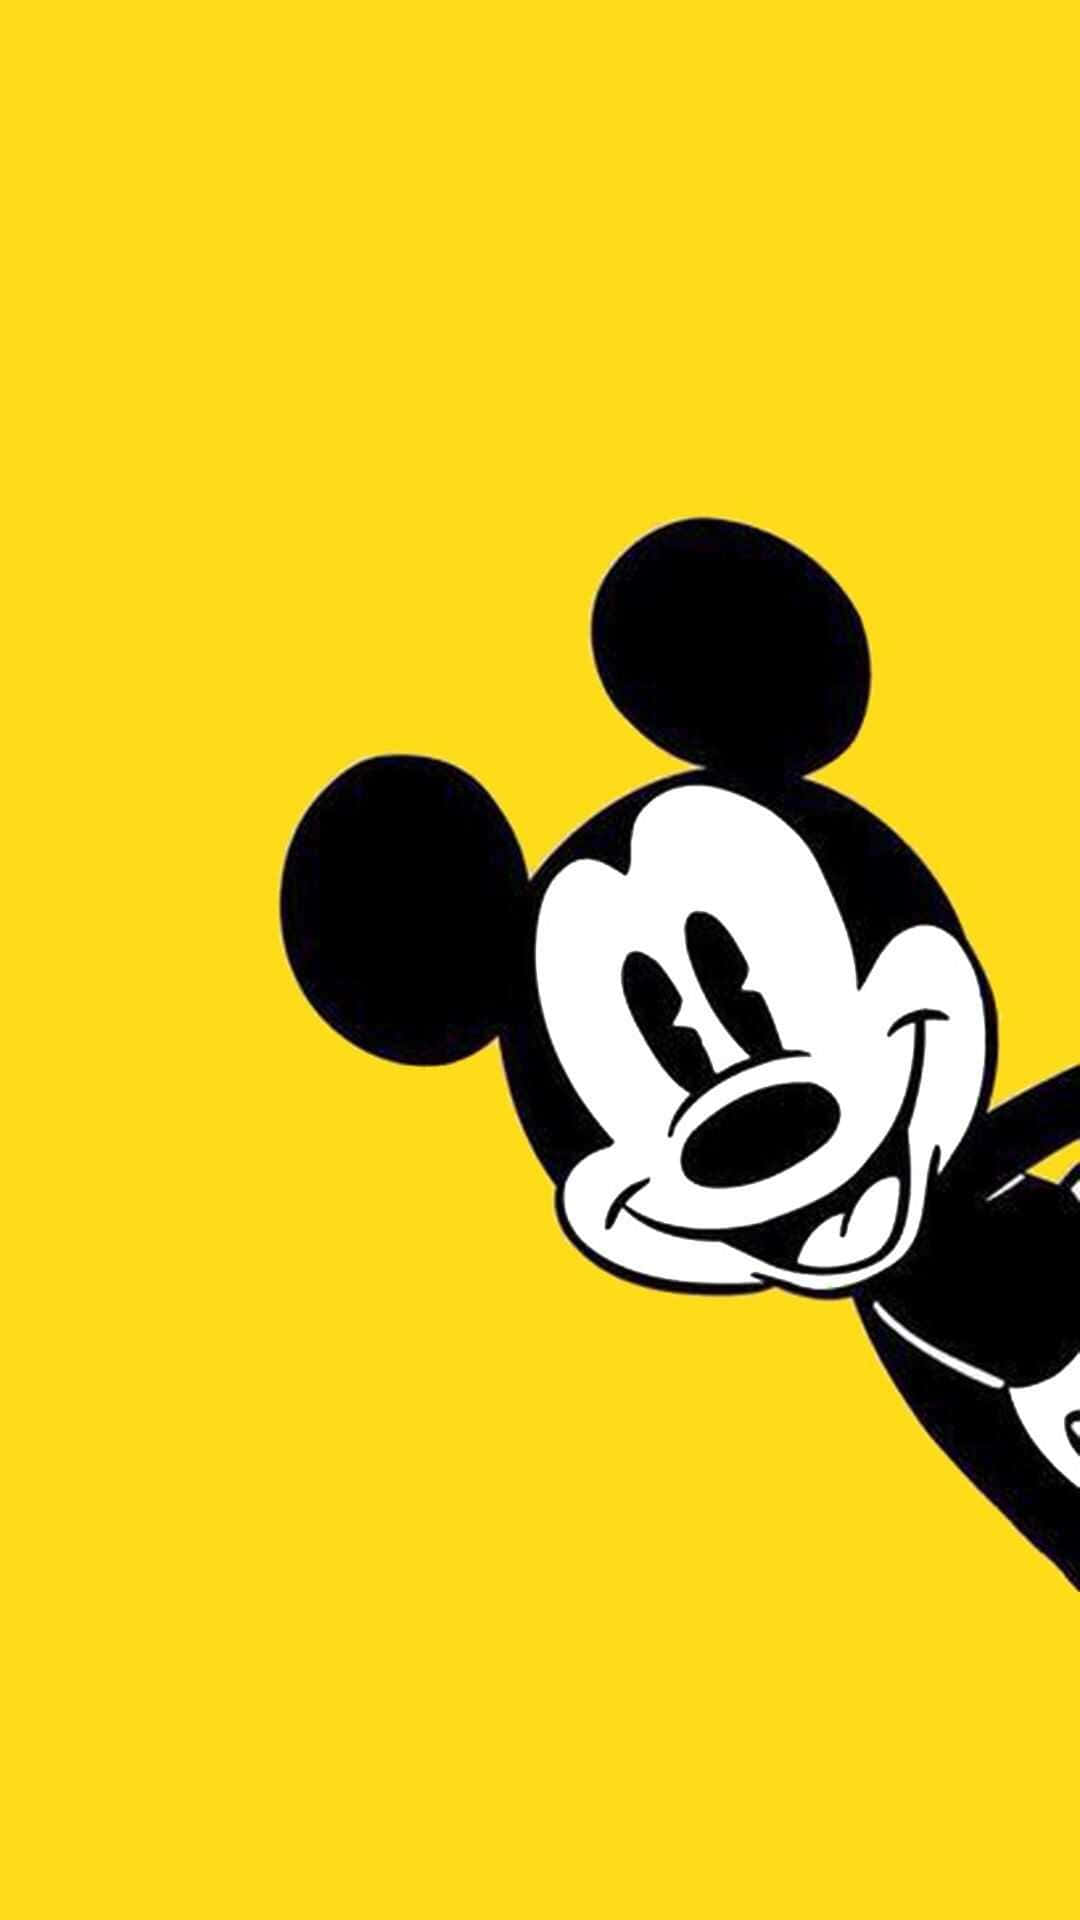 "Stay cool with Mickey Mouse and his iconic style." Wallpaper